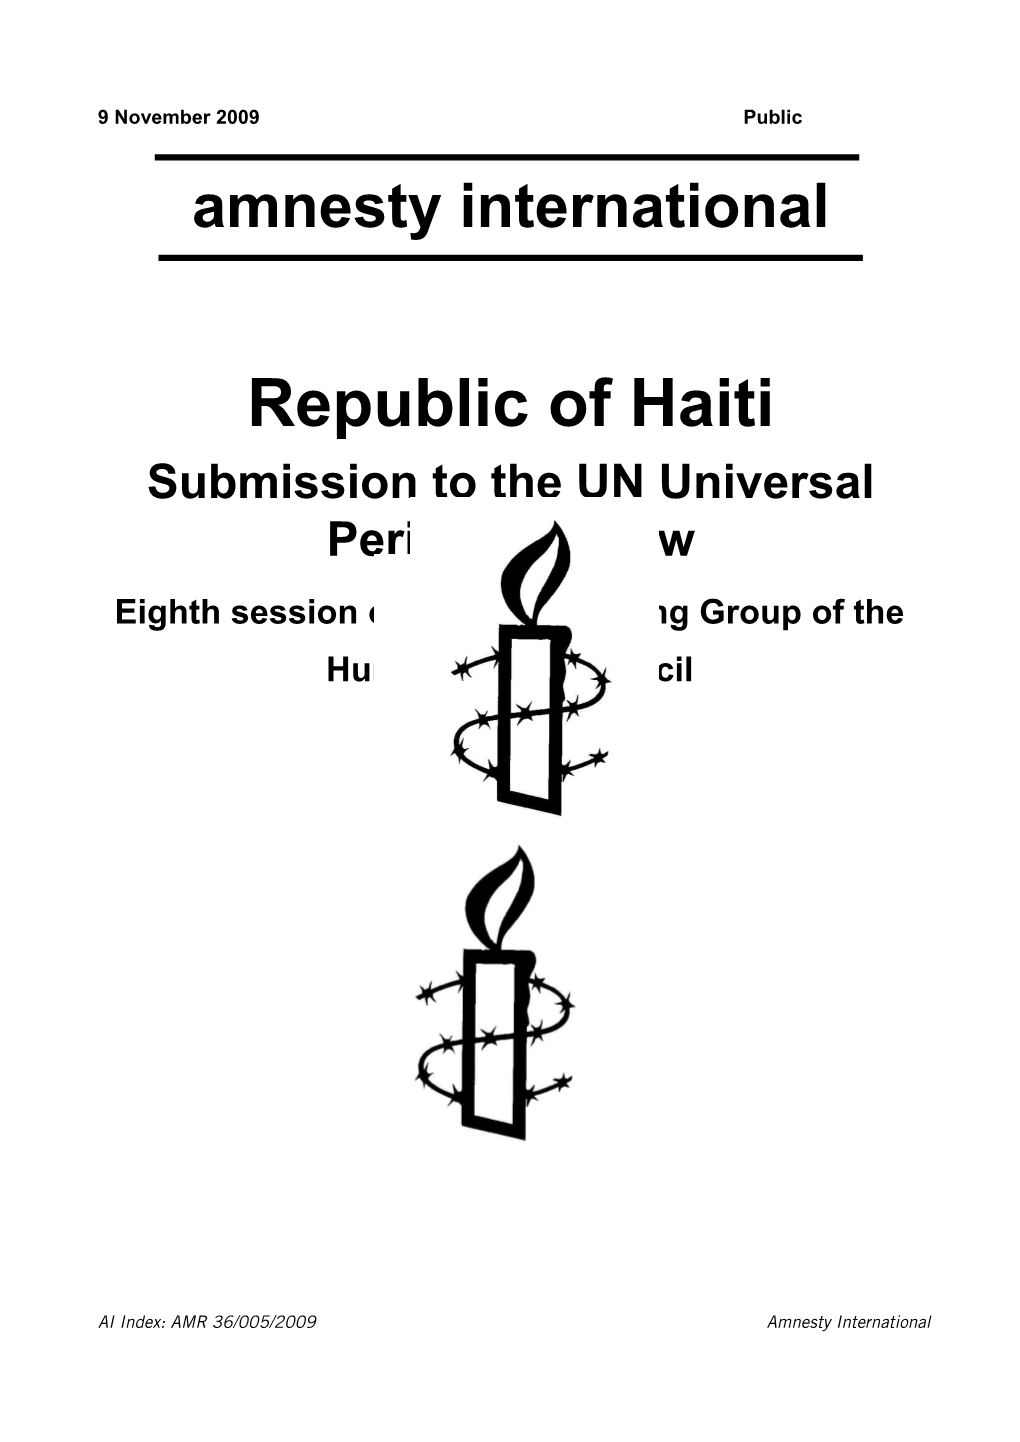 Haiti Submission to the UN Universal Periodic Review Eighth Session of the UPR Working Group of the Human Rights Council May 2010